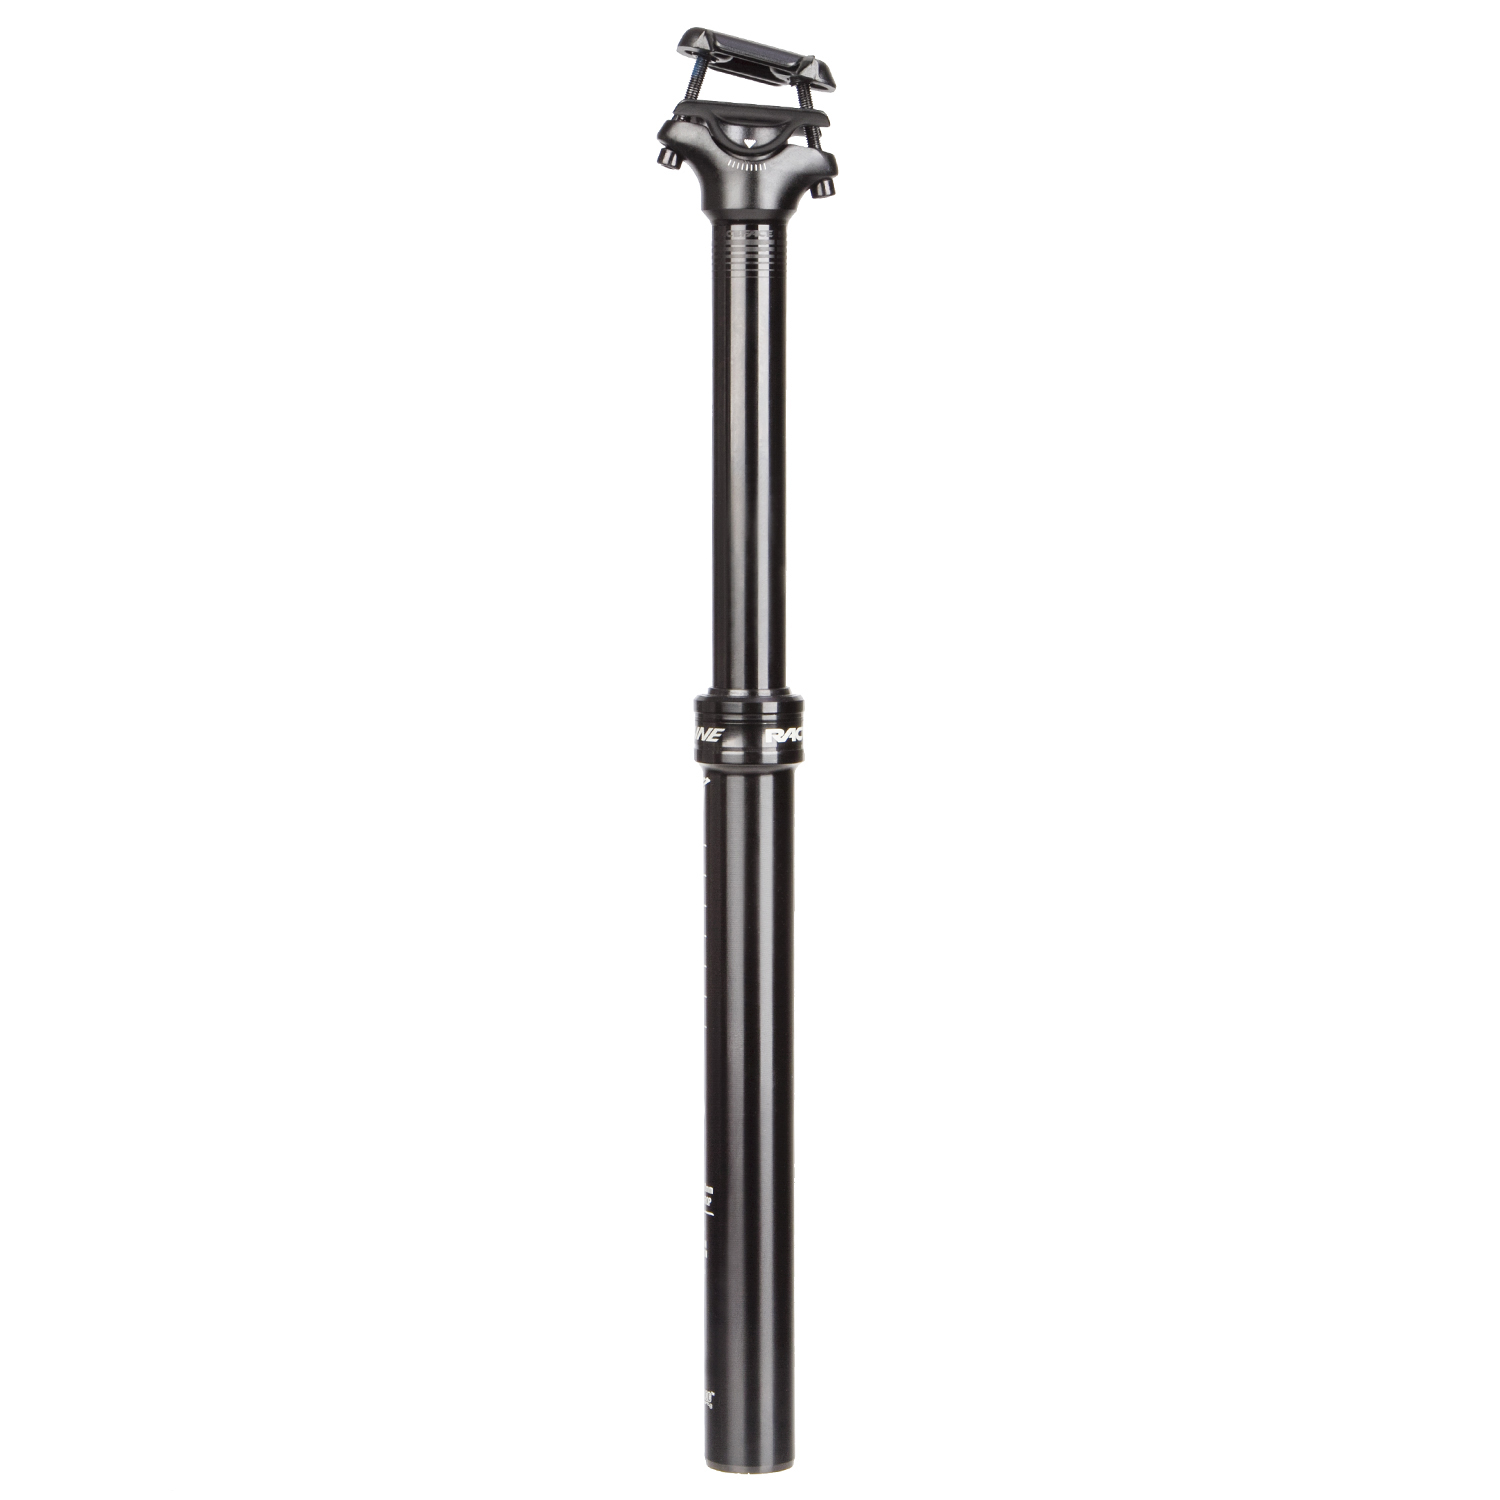 Race Face Seat Post Turbine Dropper Black, 31.6 x 415-125 mm, with Remote